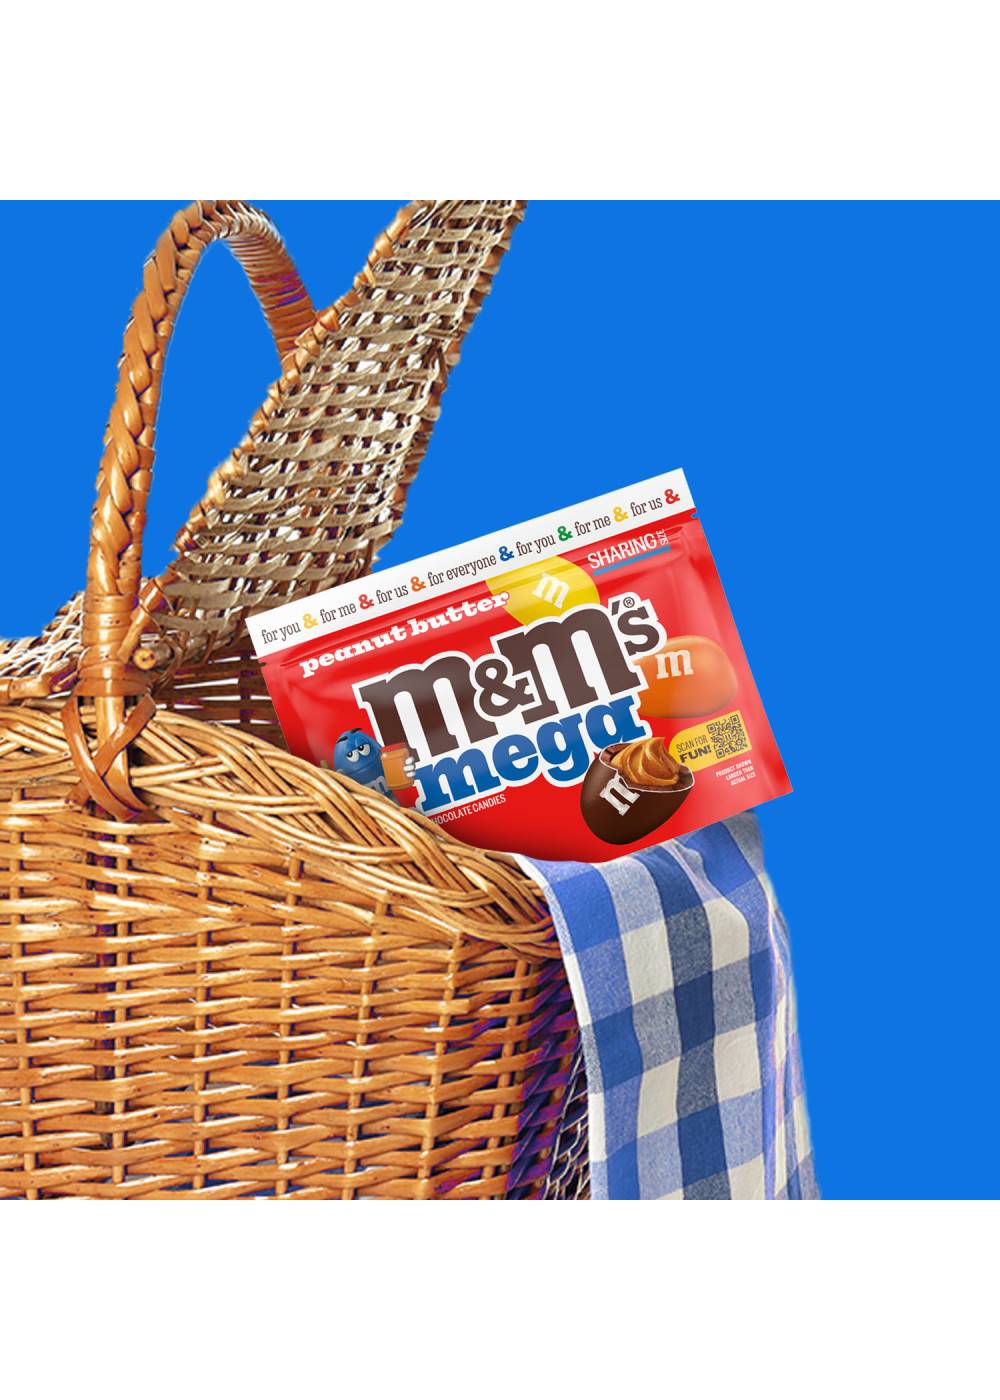 M&M'S Mega Peanut Butter Chocolate Candy - Sharing Size; image 4 of 7